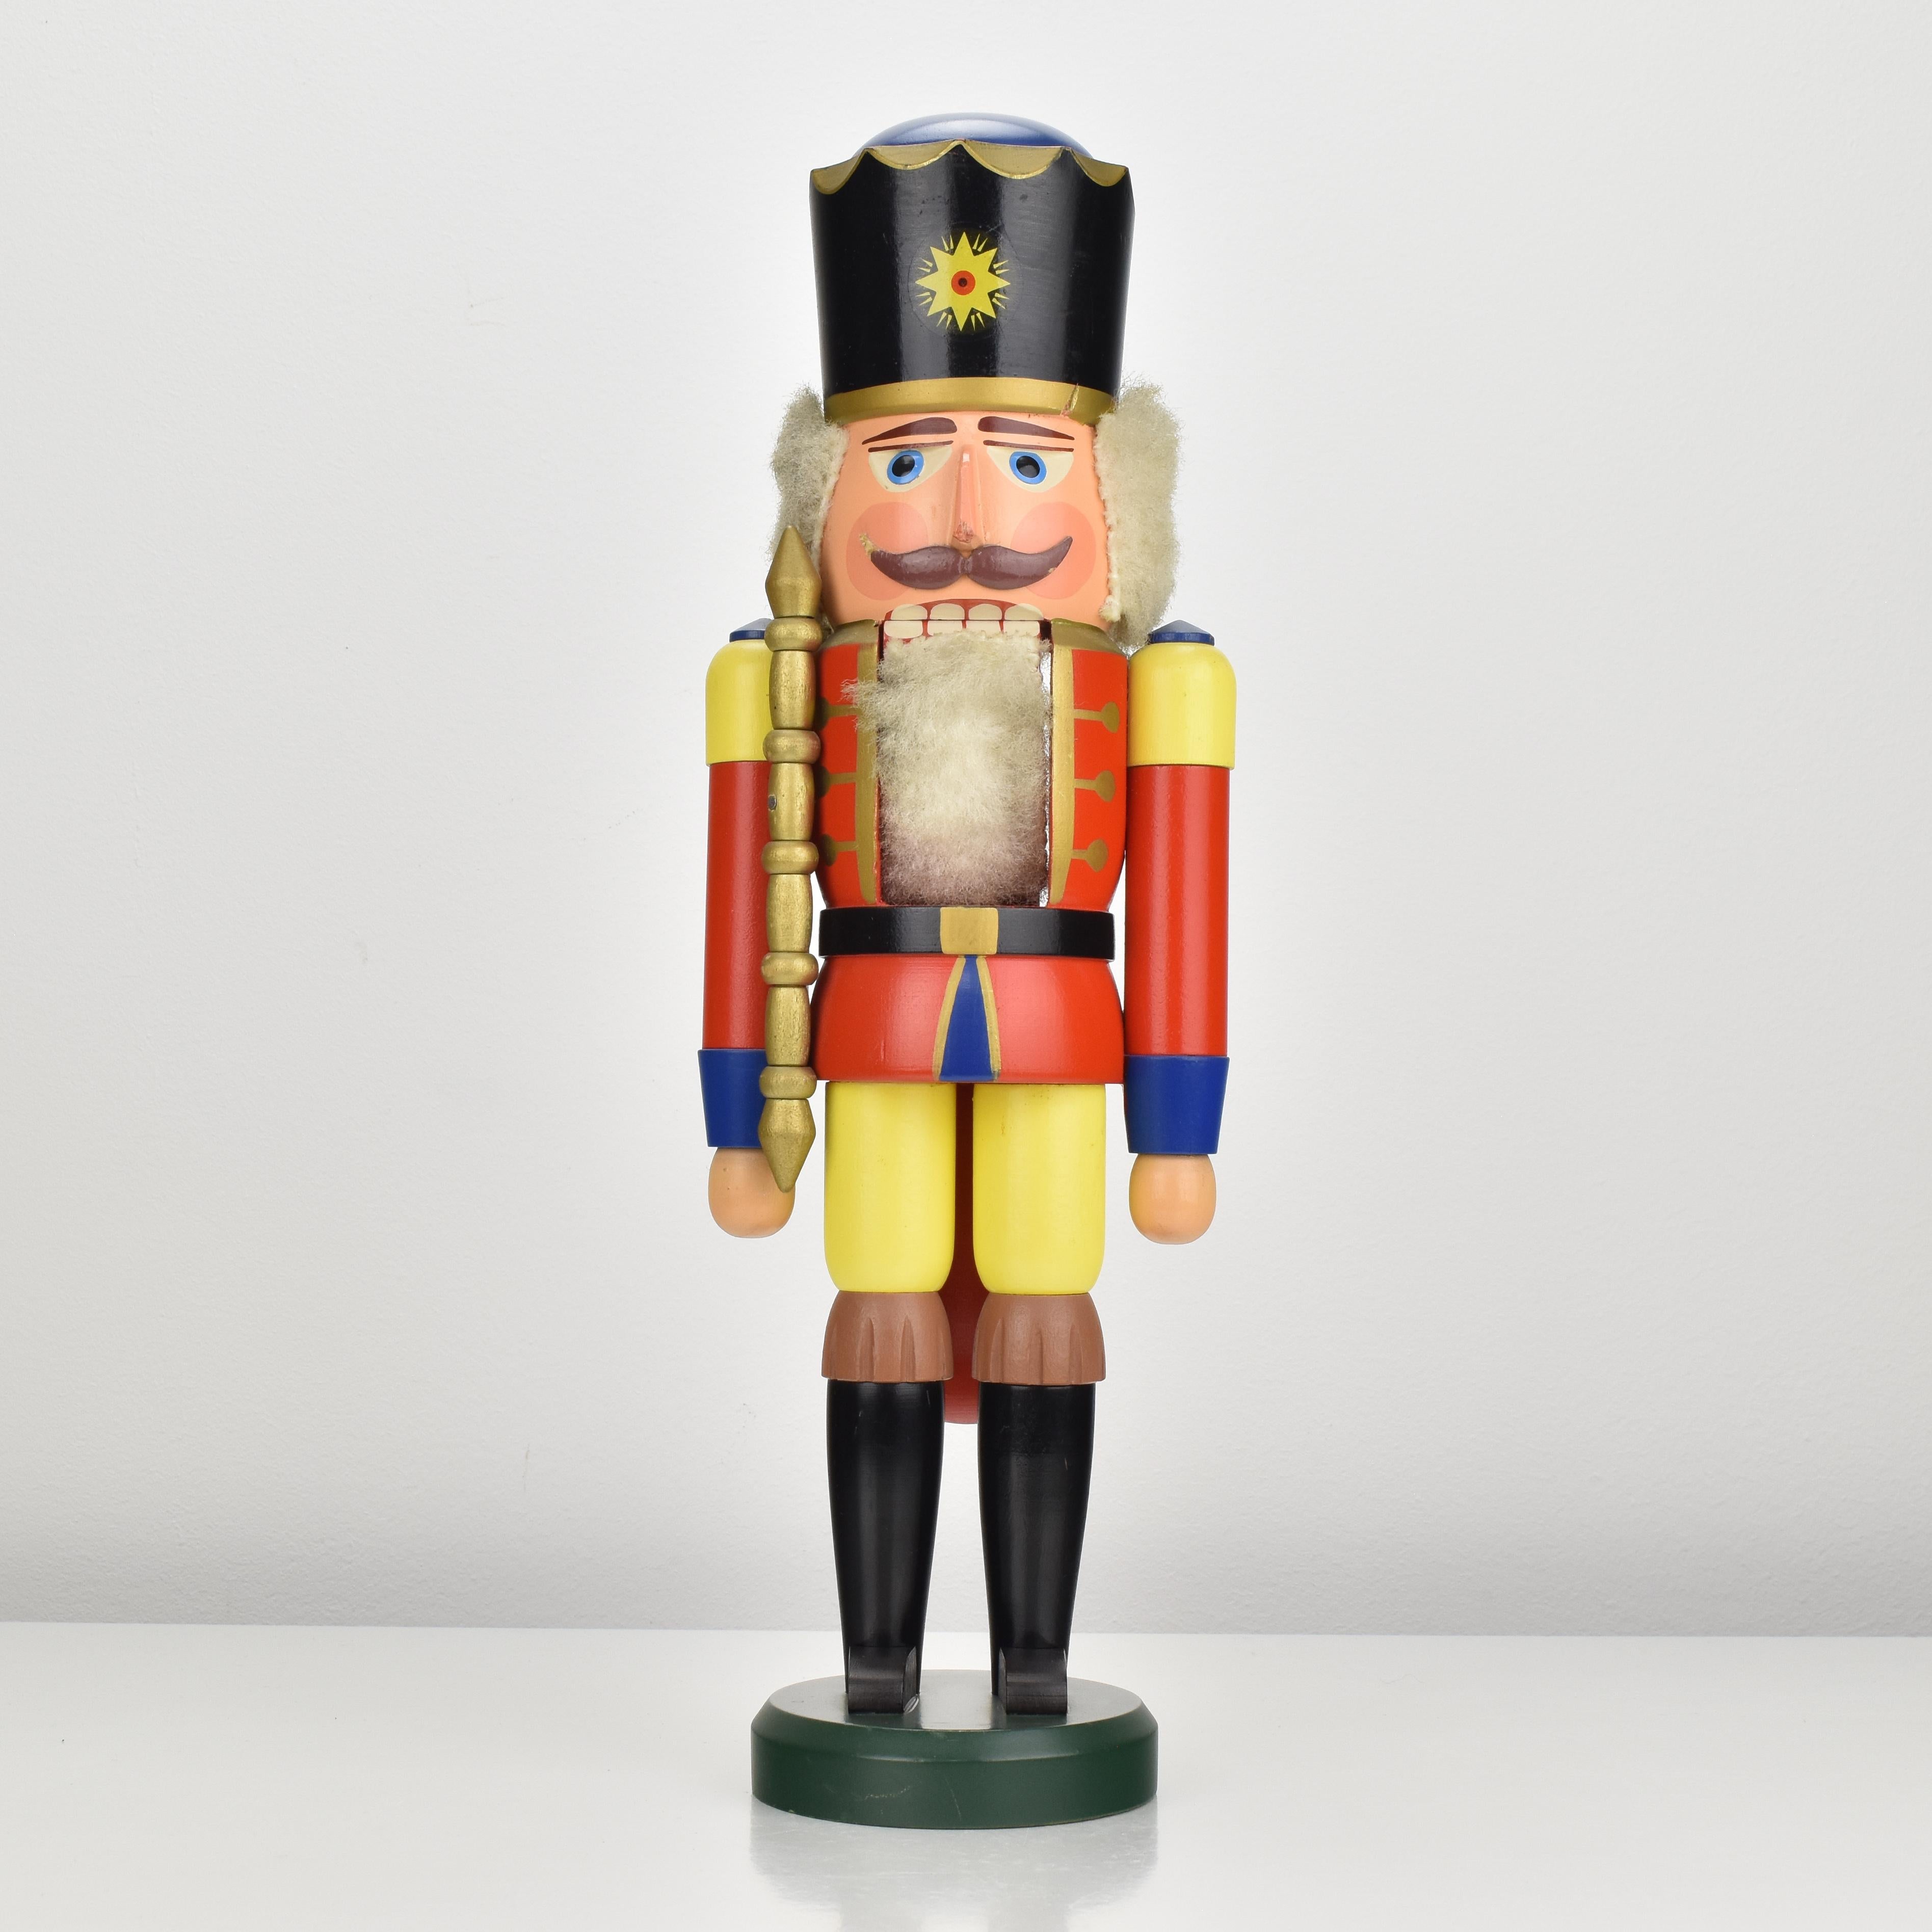 A vintage nutcracker from the Erzgebirge region, in shape of a king made of turned wood and painted in vibrant colors, dating back to the 1970s.
This large nutcracker showcases the intricate craftsmanship and traditional German design, reflecting